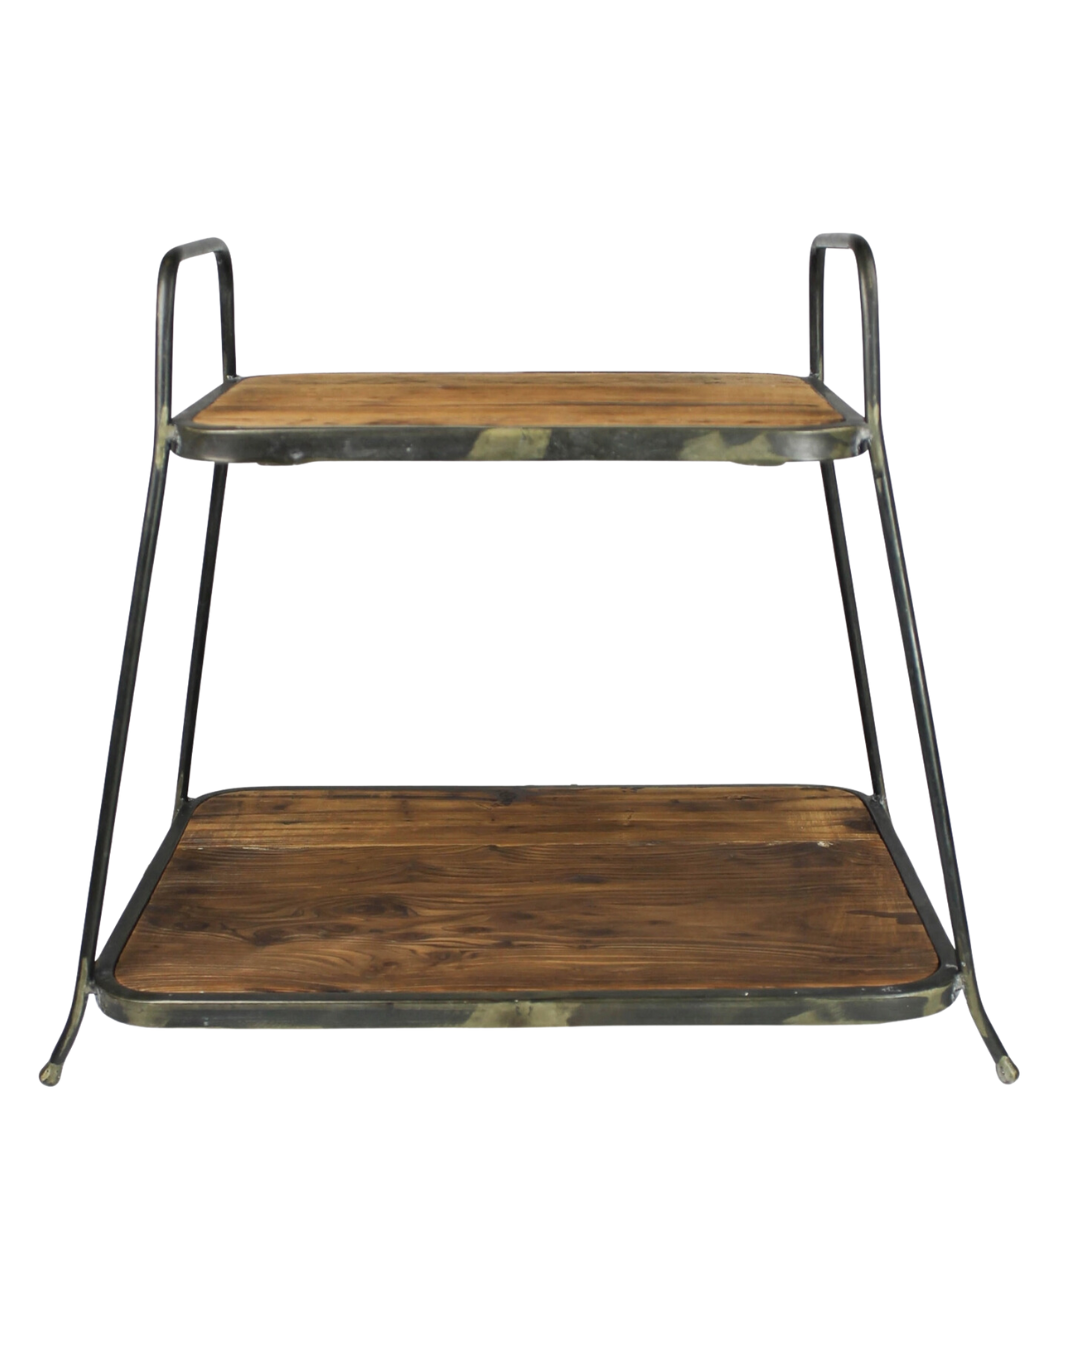 A rustic Catalina Two-Tier Stand bungalow-style wooden and metal shelf with a darker, distressed wood finish and black metal frame, isolated on a white background. (HomArt)